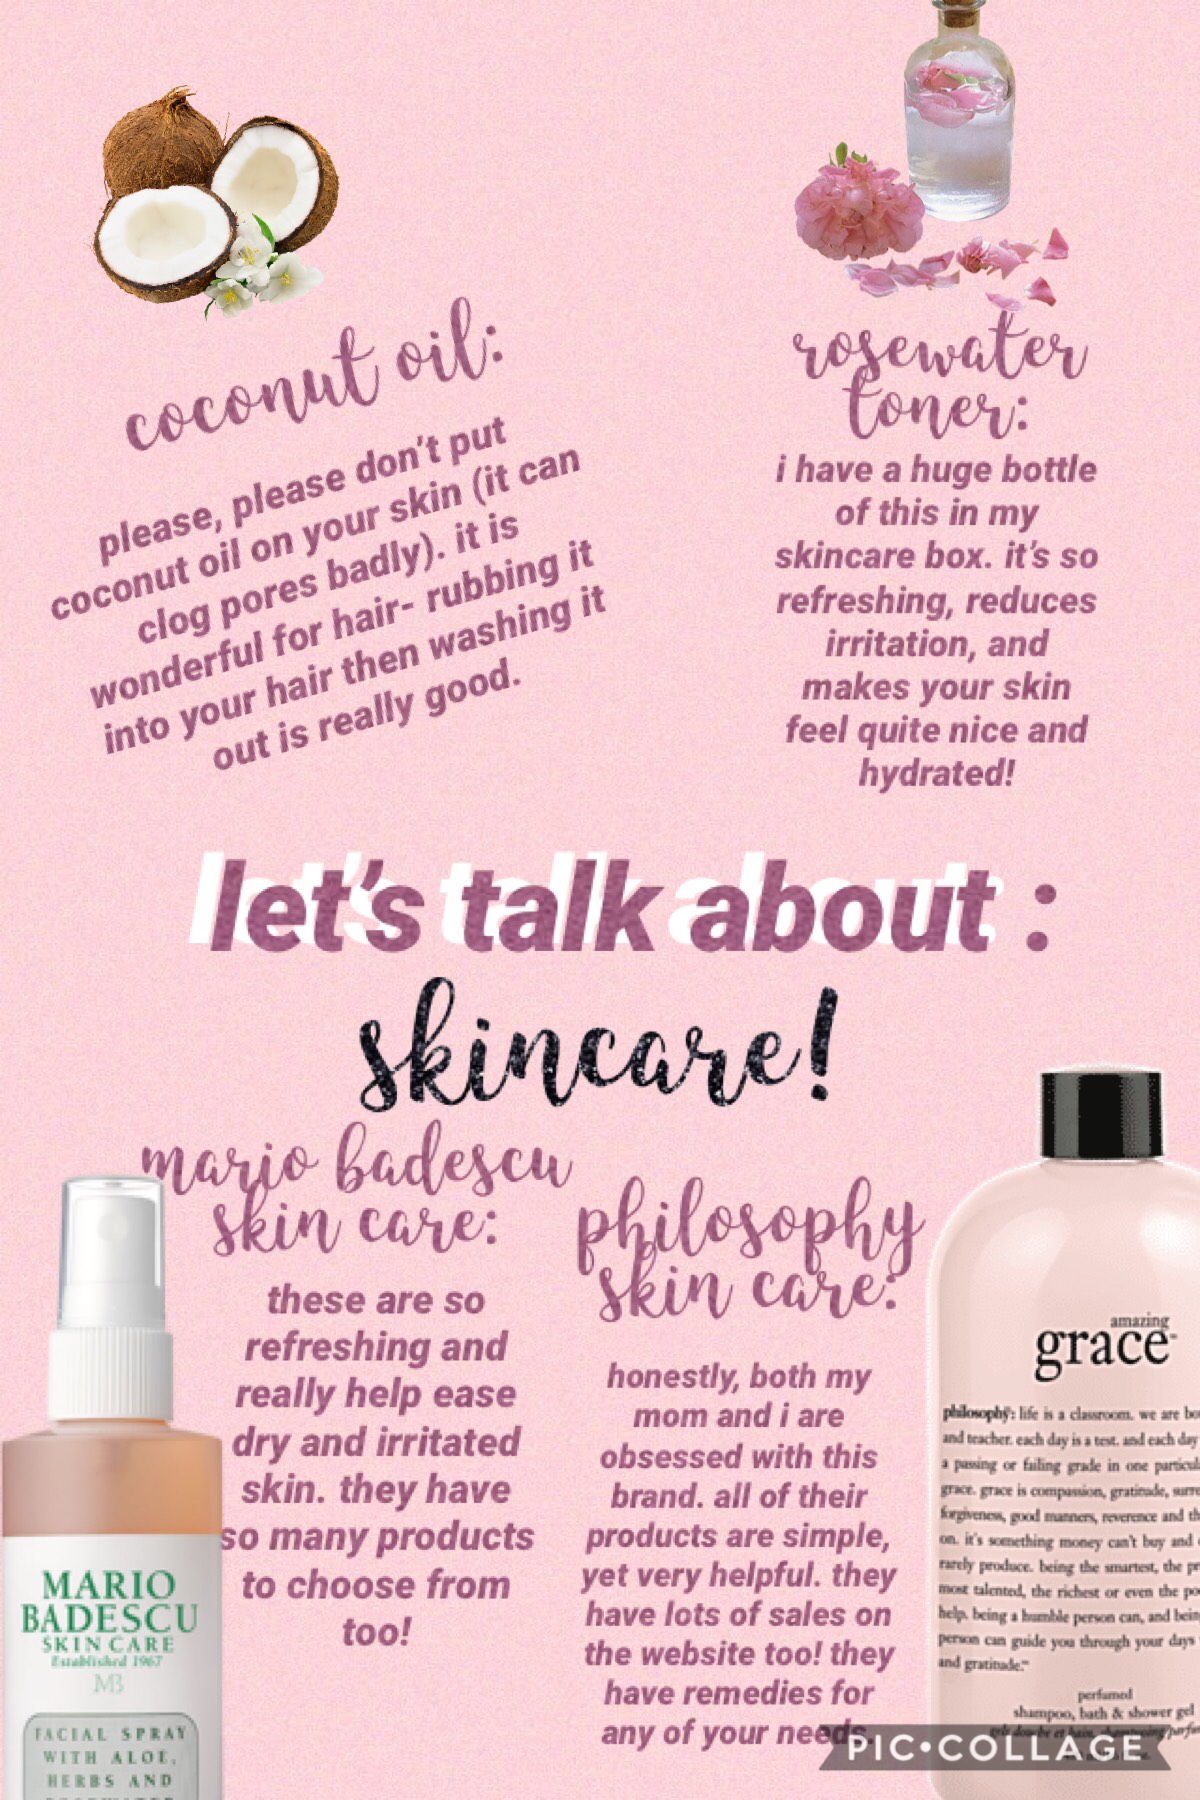 💕 tap here 💕
i care about all of you, so i wanted to share my own skincare tips with you. i hope that these will help you too. please comment if you would like more of these, and i’d be glad to make them!